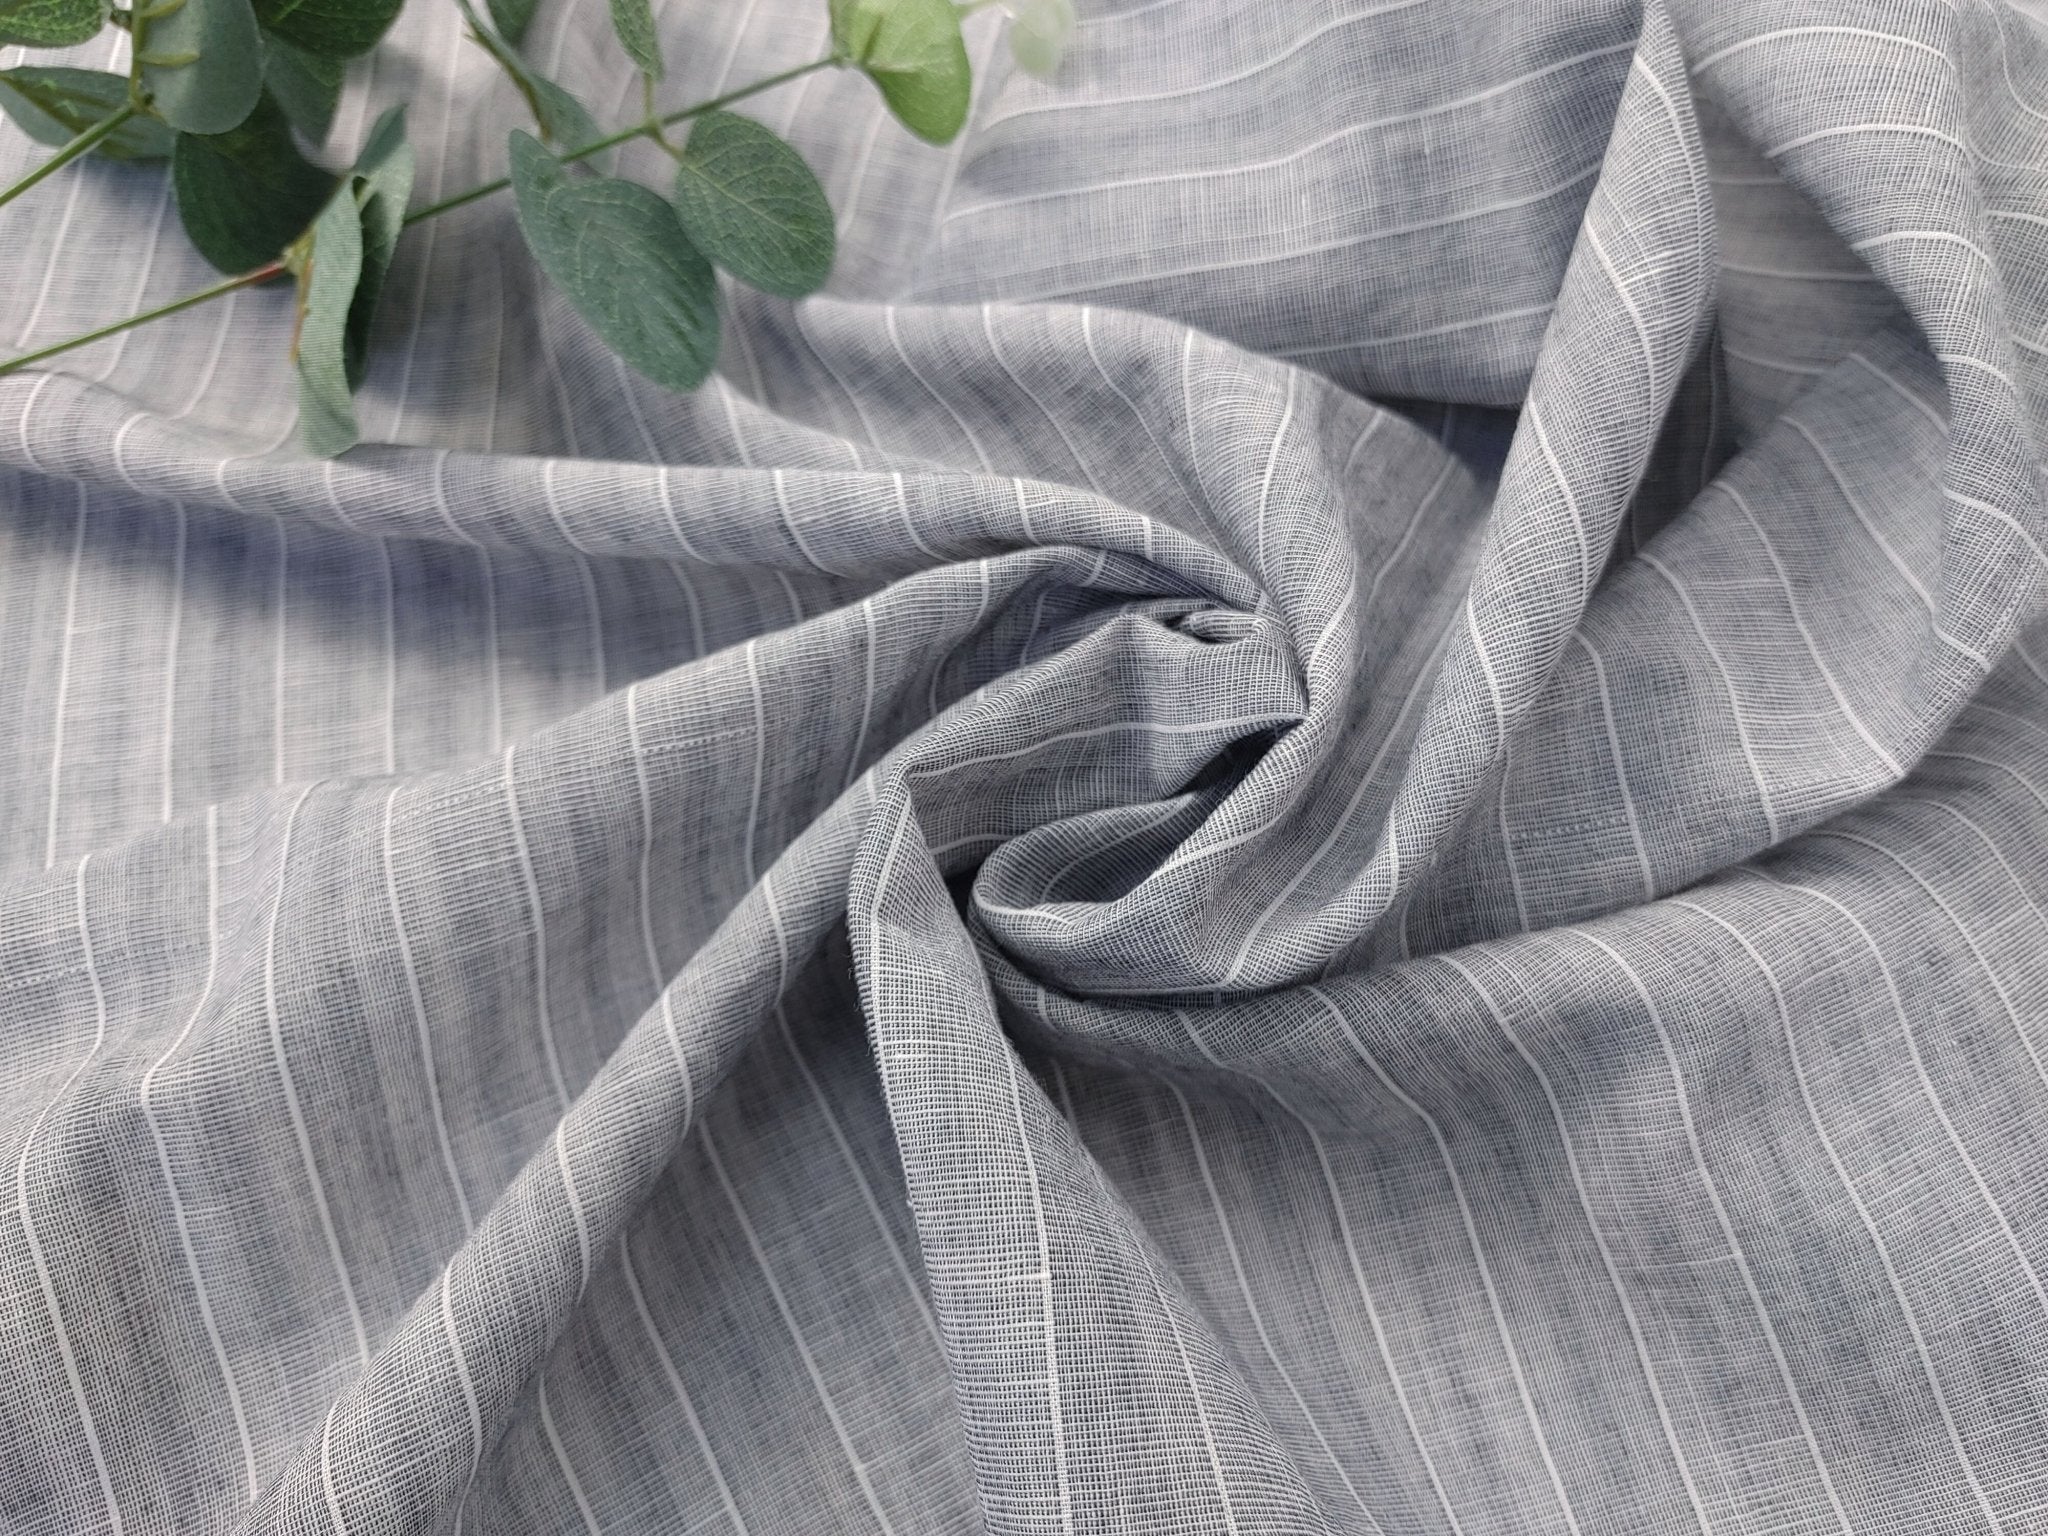 Grey Stripe Linen Cotton Fabric - Versatile Material for Sewing and Crafting 4926 - The Linen Lab - Gray